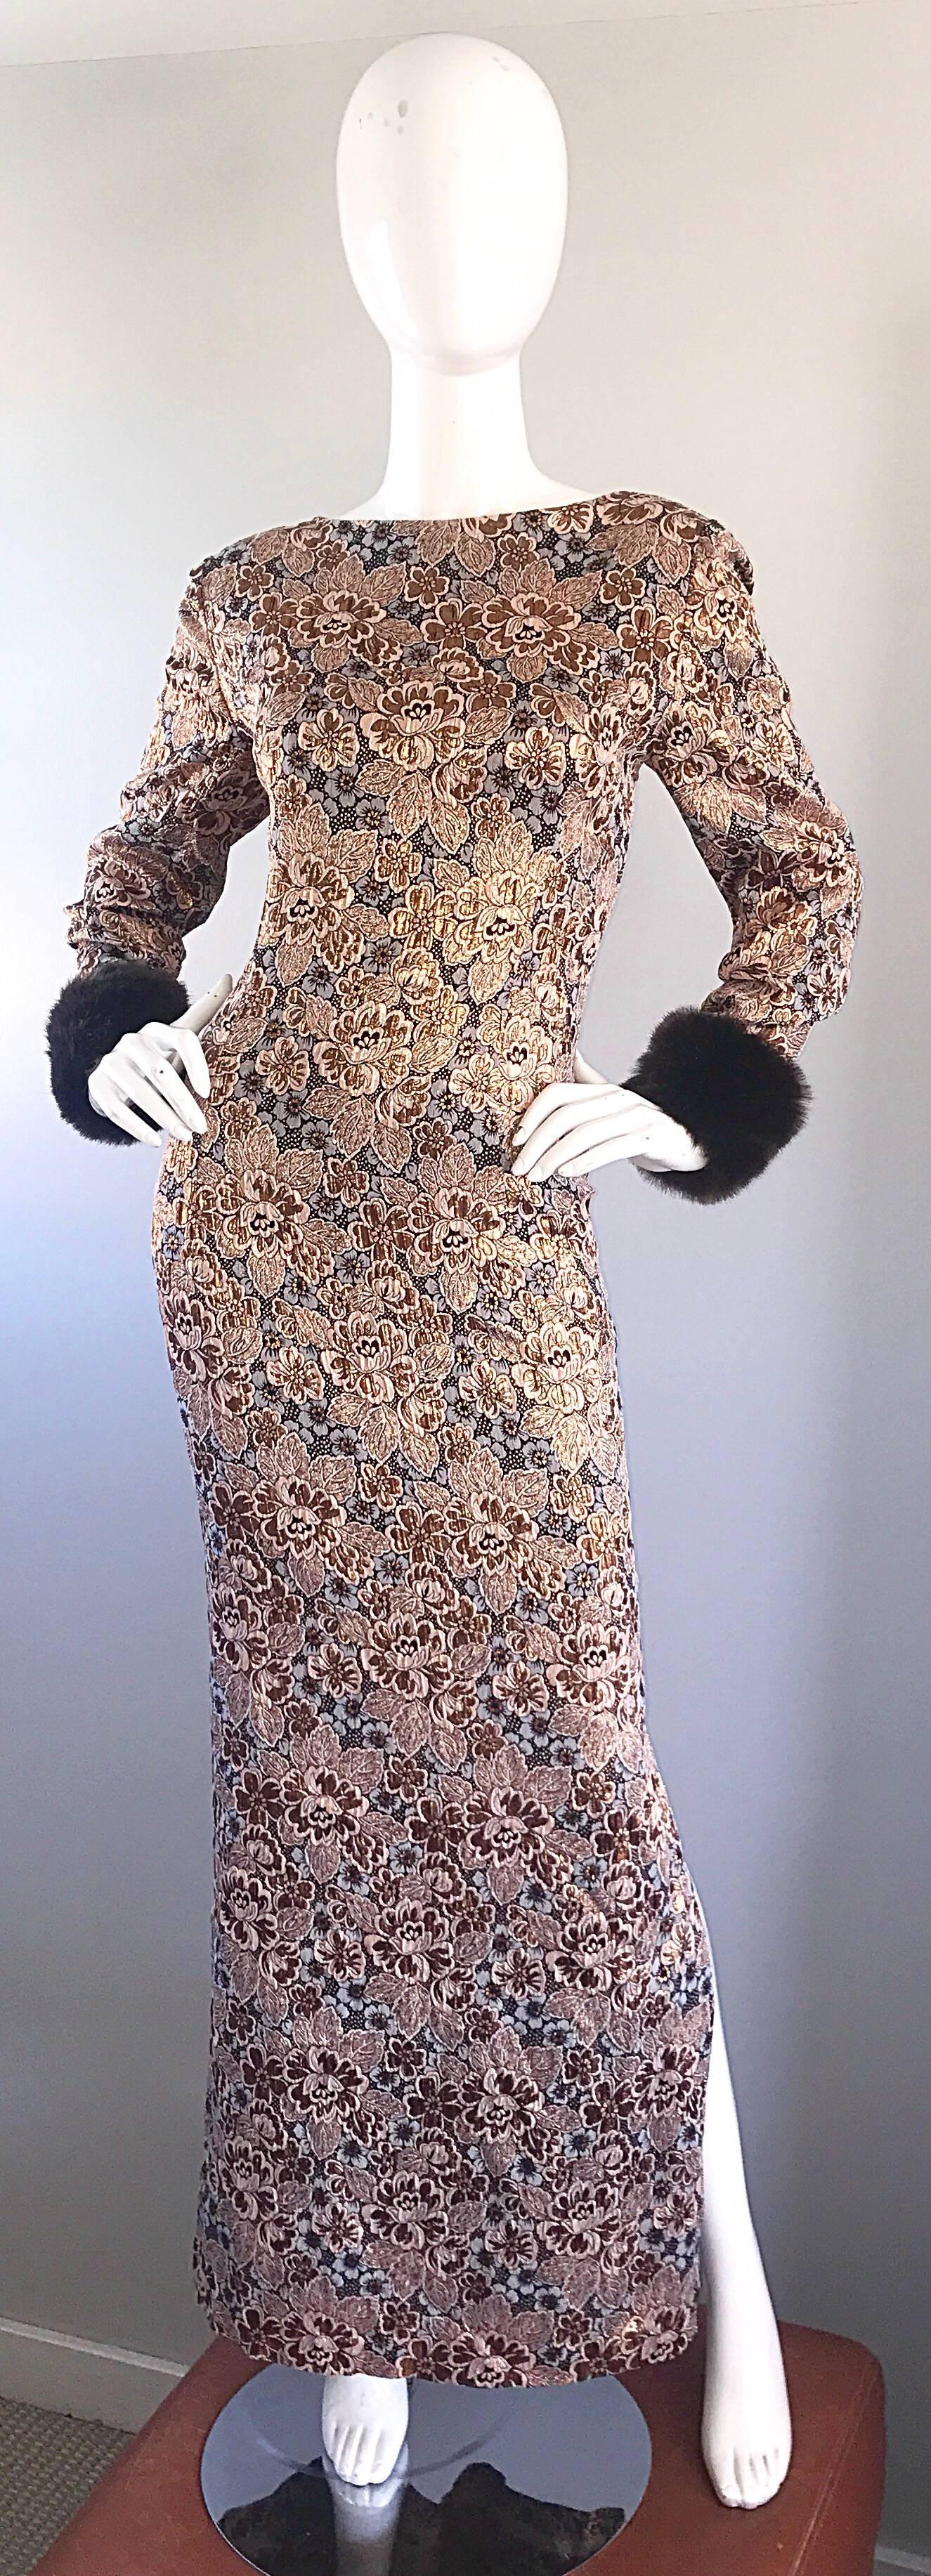 Sensational 60s BILL BLASS demi couture long sleeve faux fur evening gown! Features flower prints in gold, rose gold, and brown on metallic silk. Long sleeves feature brown faux fur cuffs. High neck with a flattering low cut back. Full metal zipper